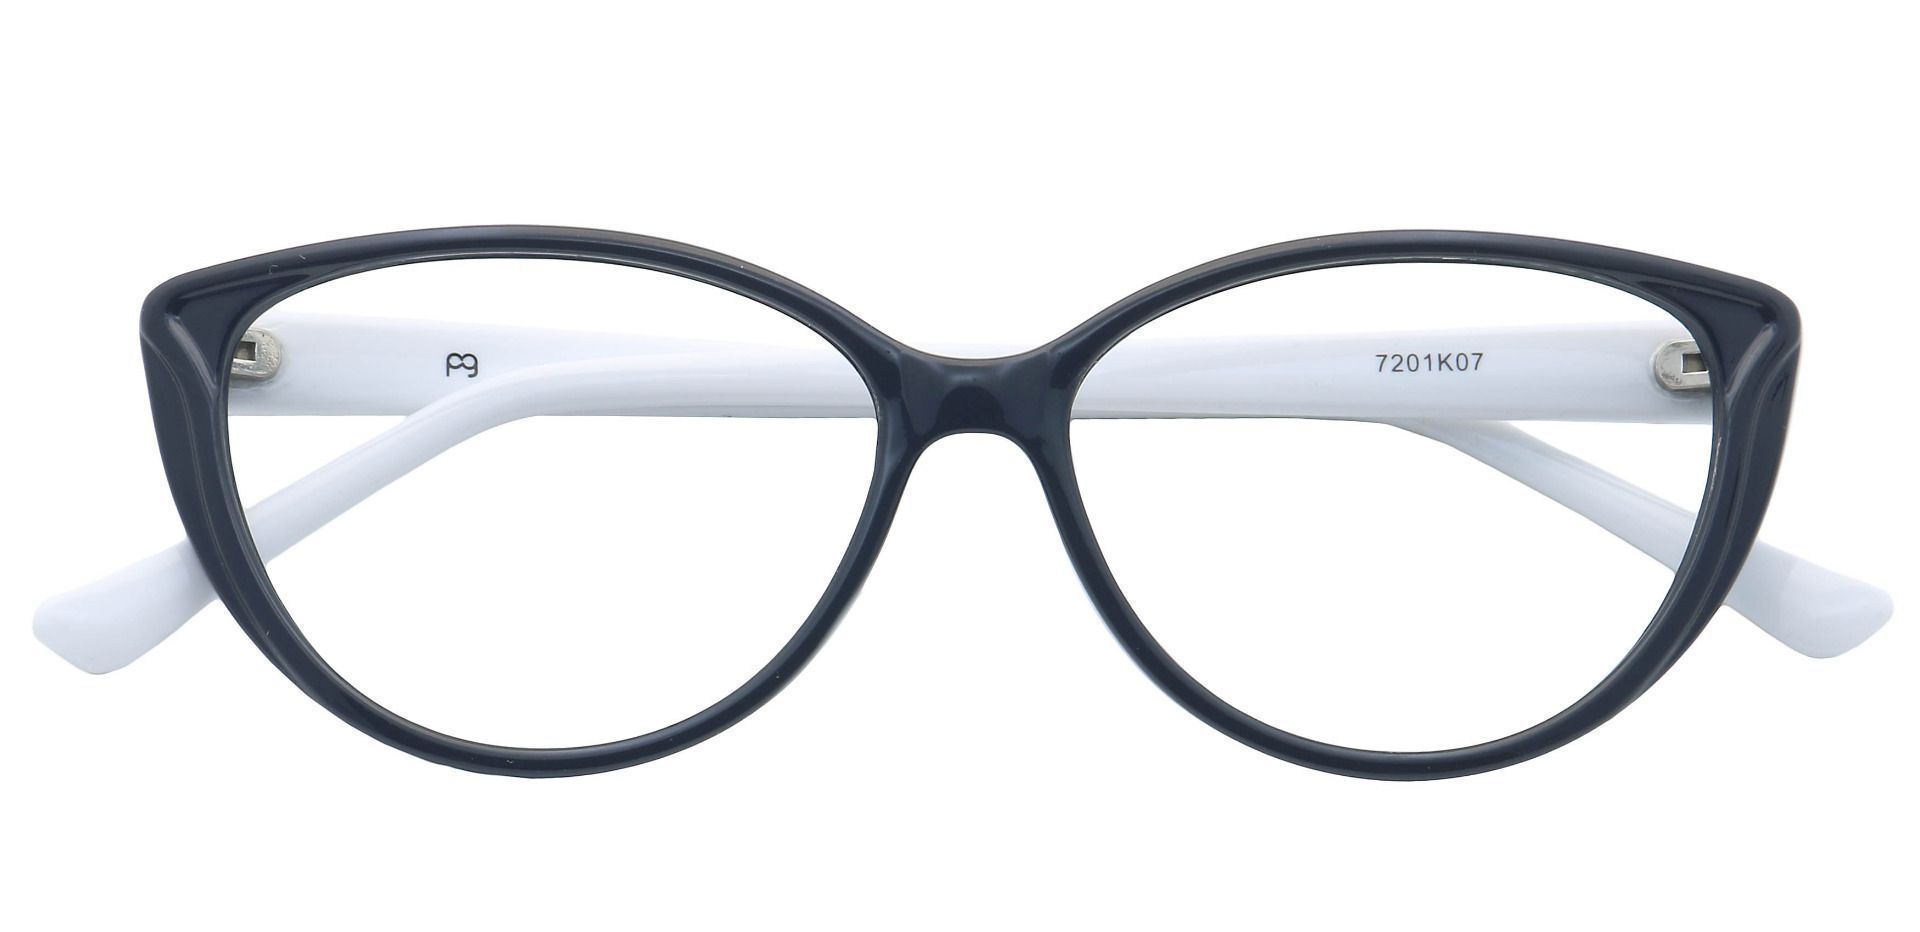 A pair of glasses with cat eye-style frames.